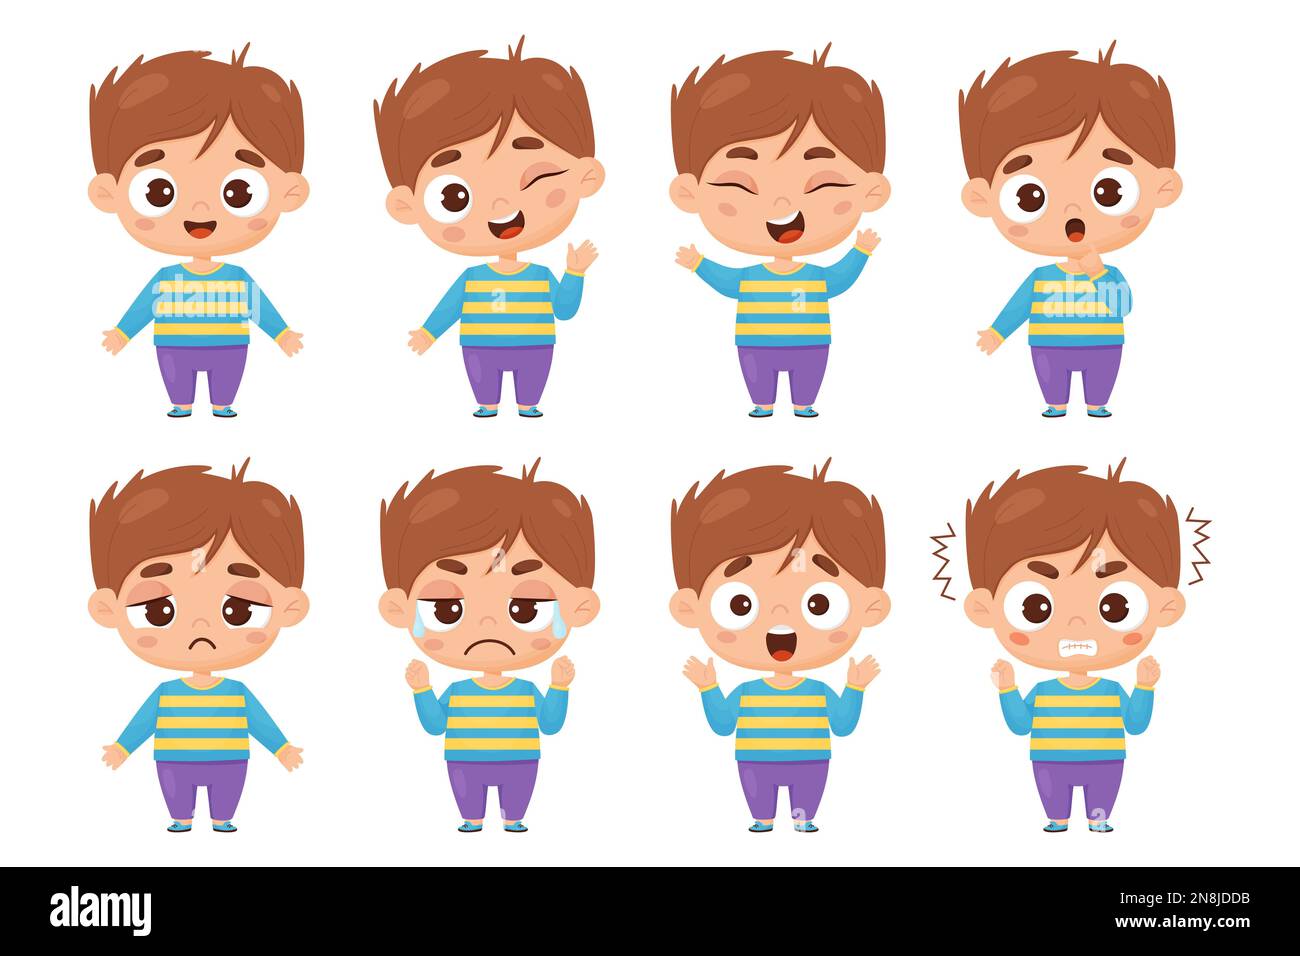 kids collection of emotions. Cute boy in full growth with different facial expressions and feelings - happiness, crying, anger, smile, delight, wonder Stock Vector